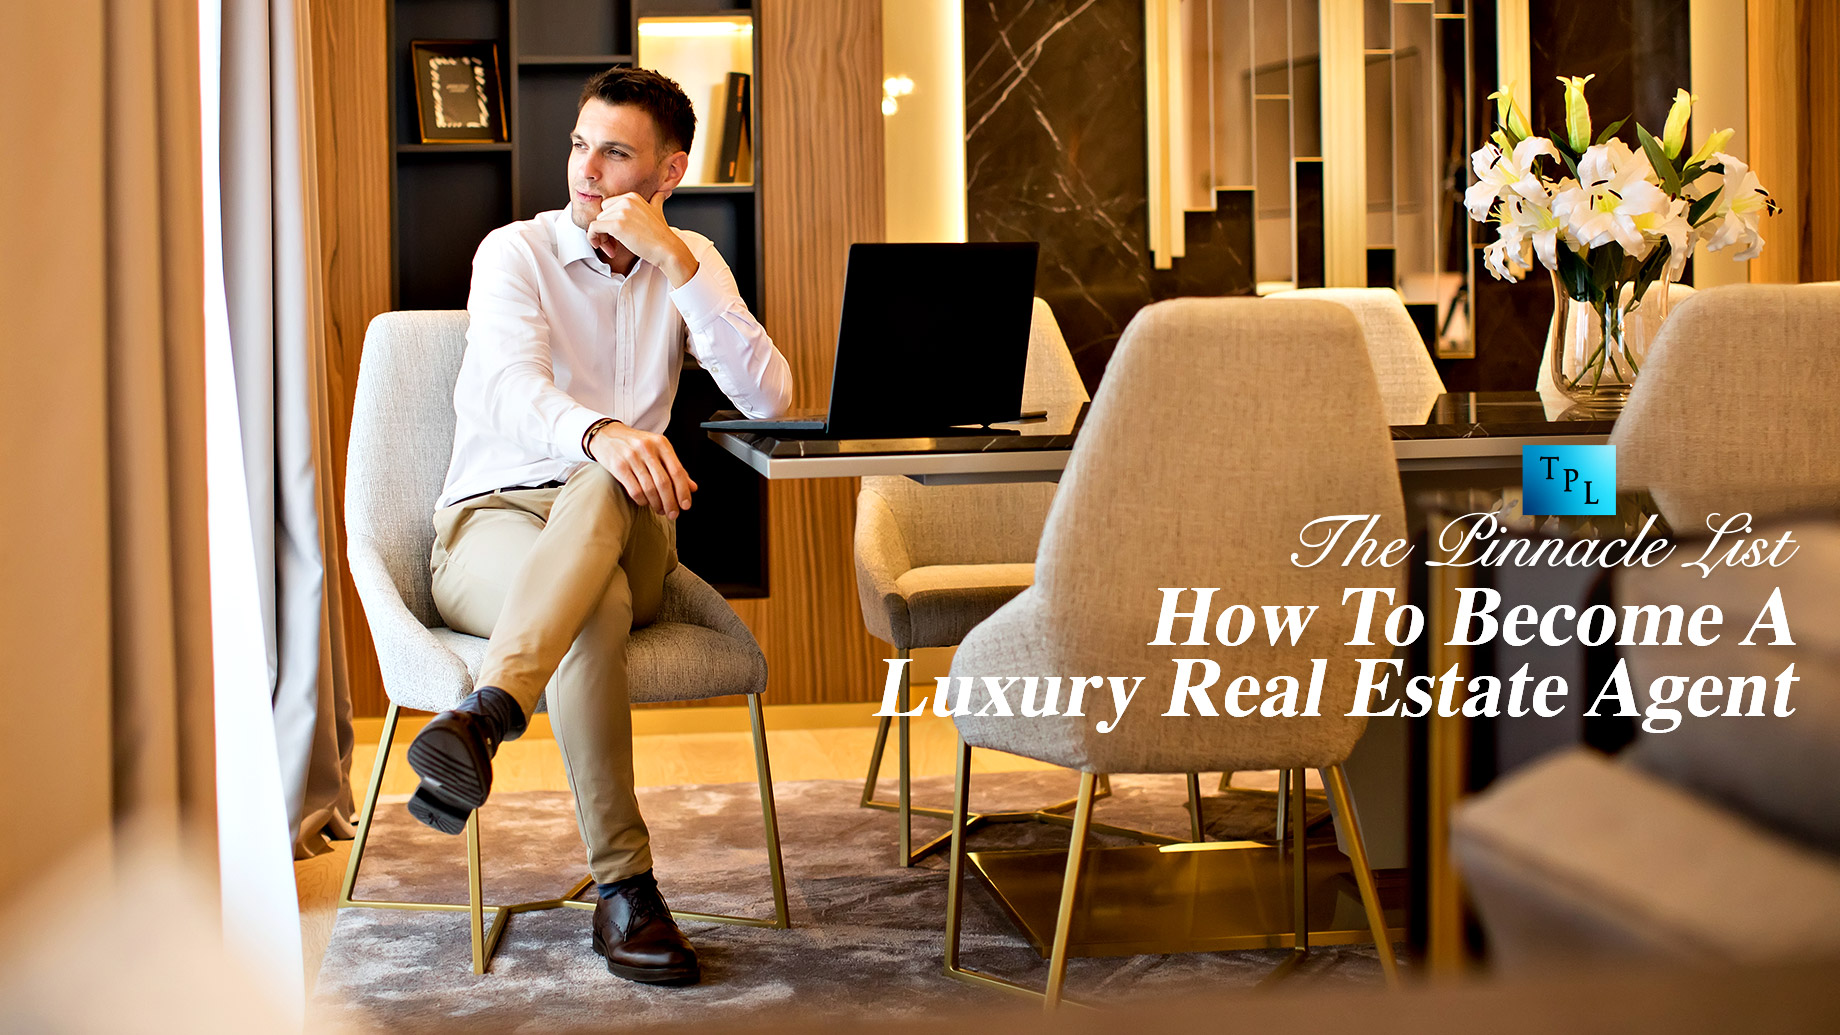 How To Become A Luxury Real Estate Agent